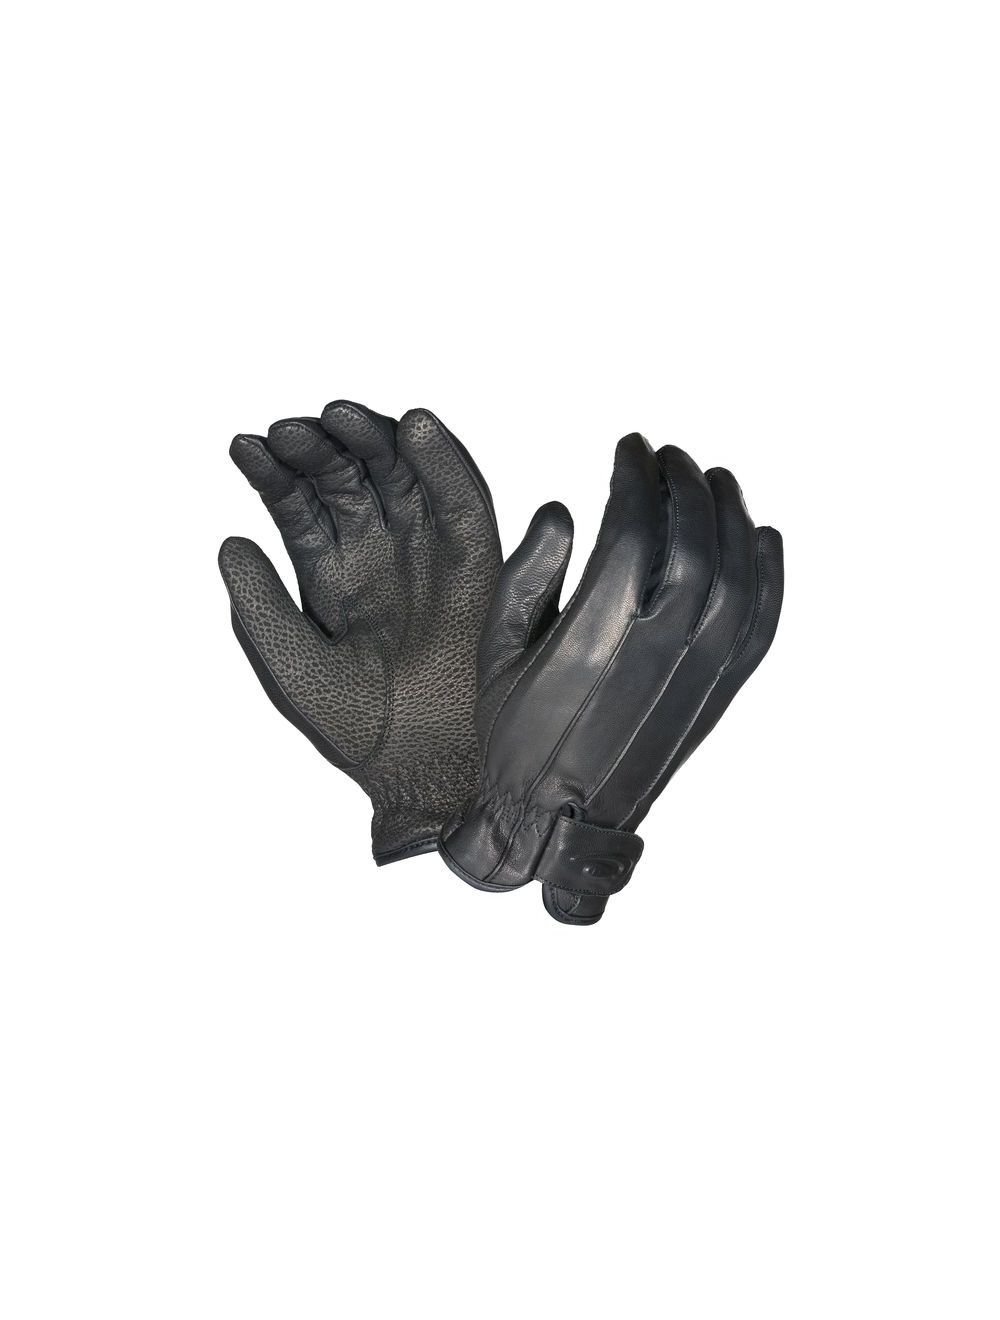 Leather Insulated Winter Patrol Glove